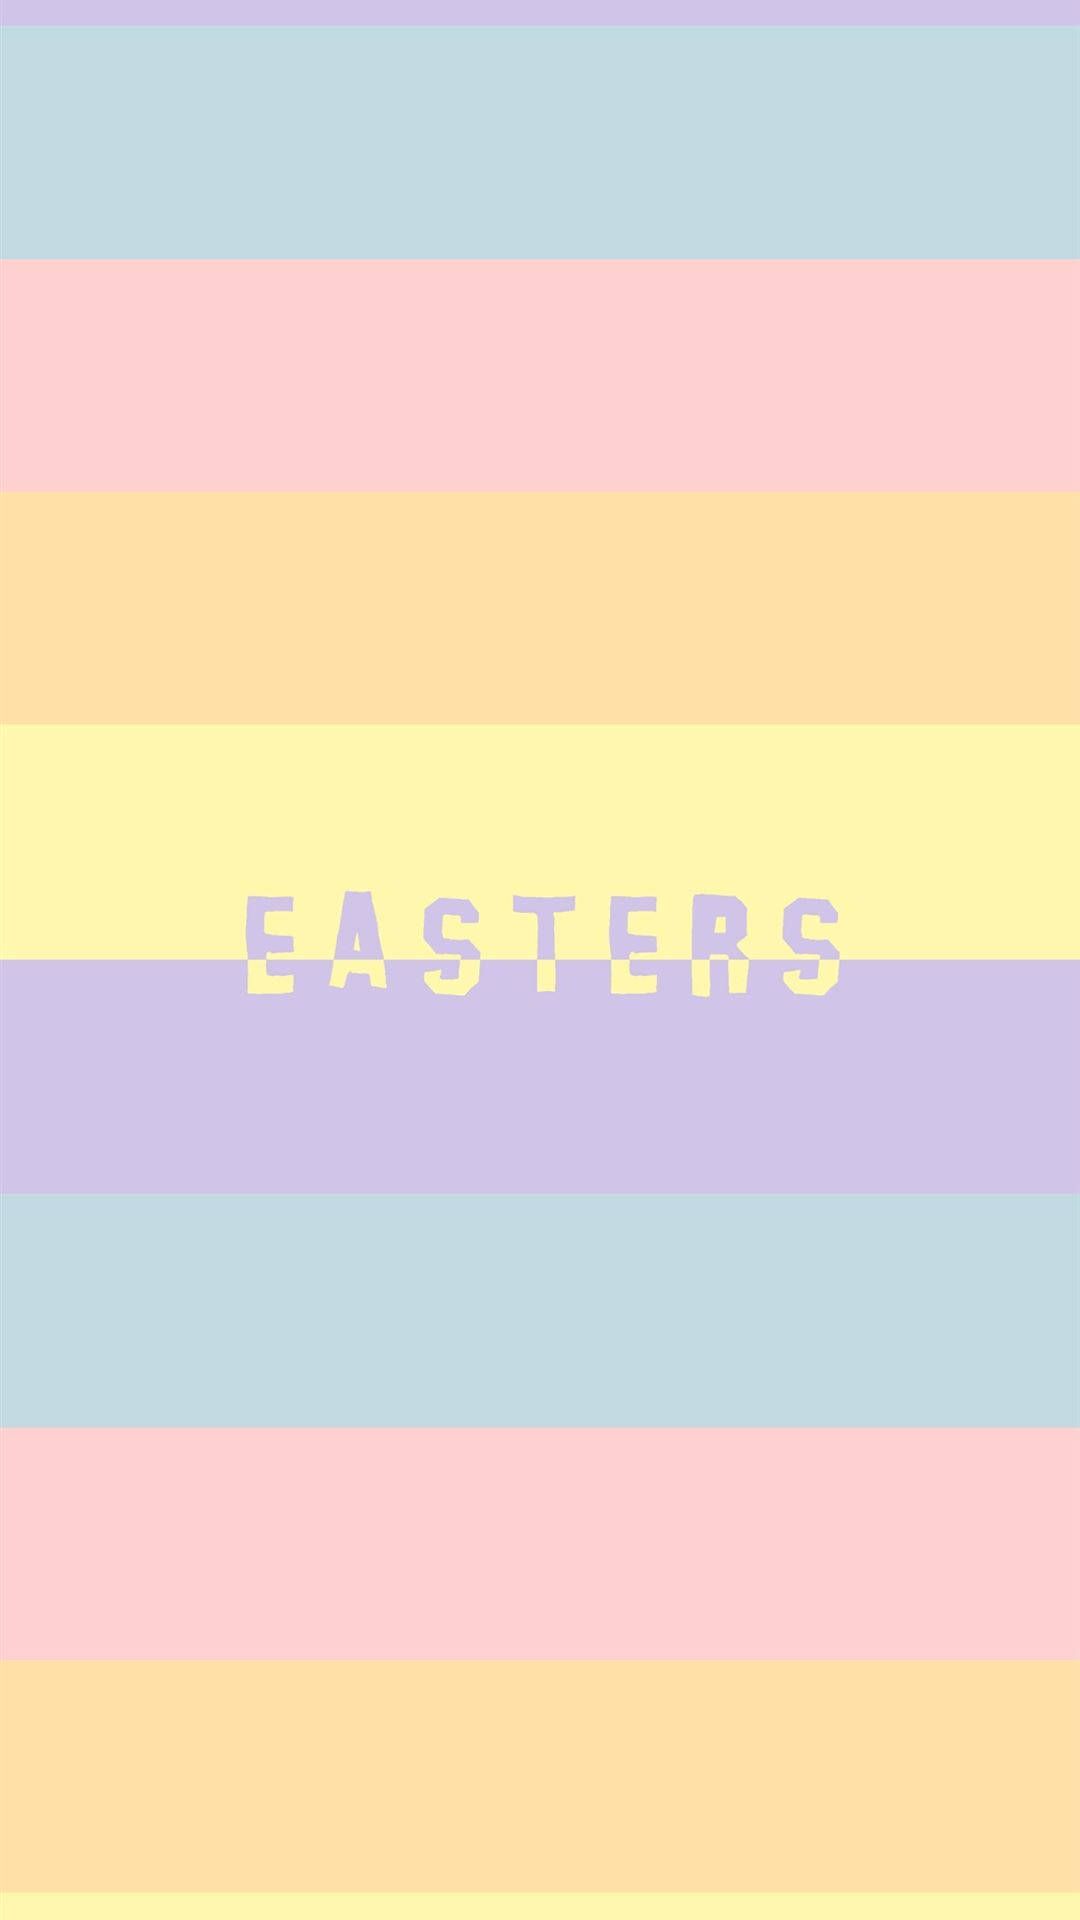 The easters poster is a colorful background with text - Easter